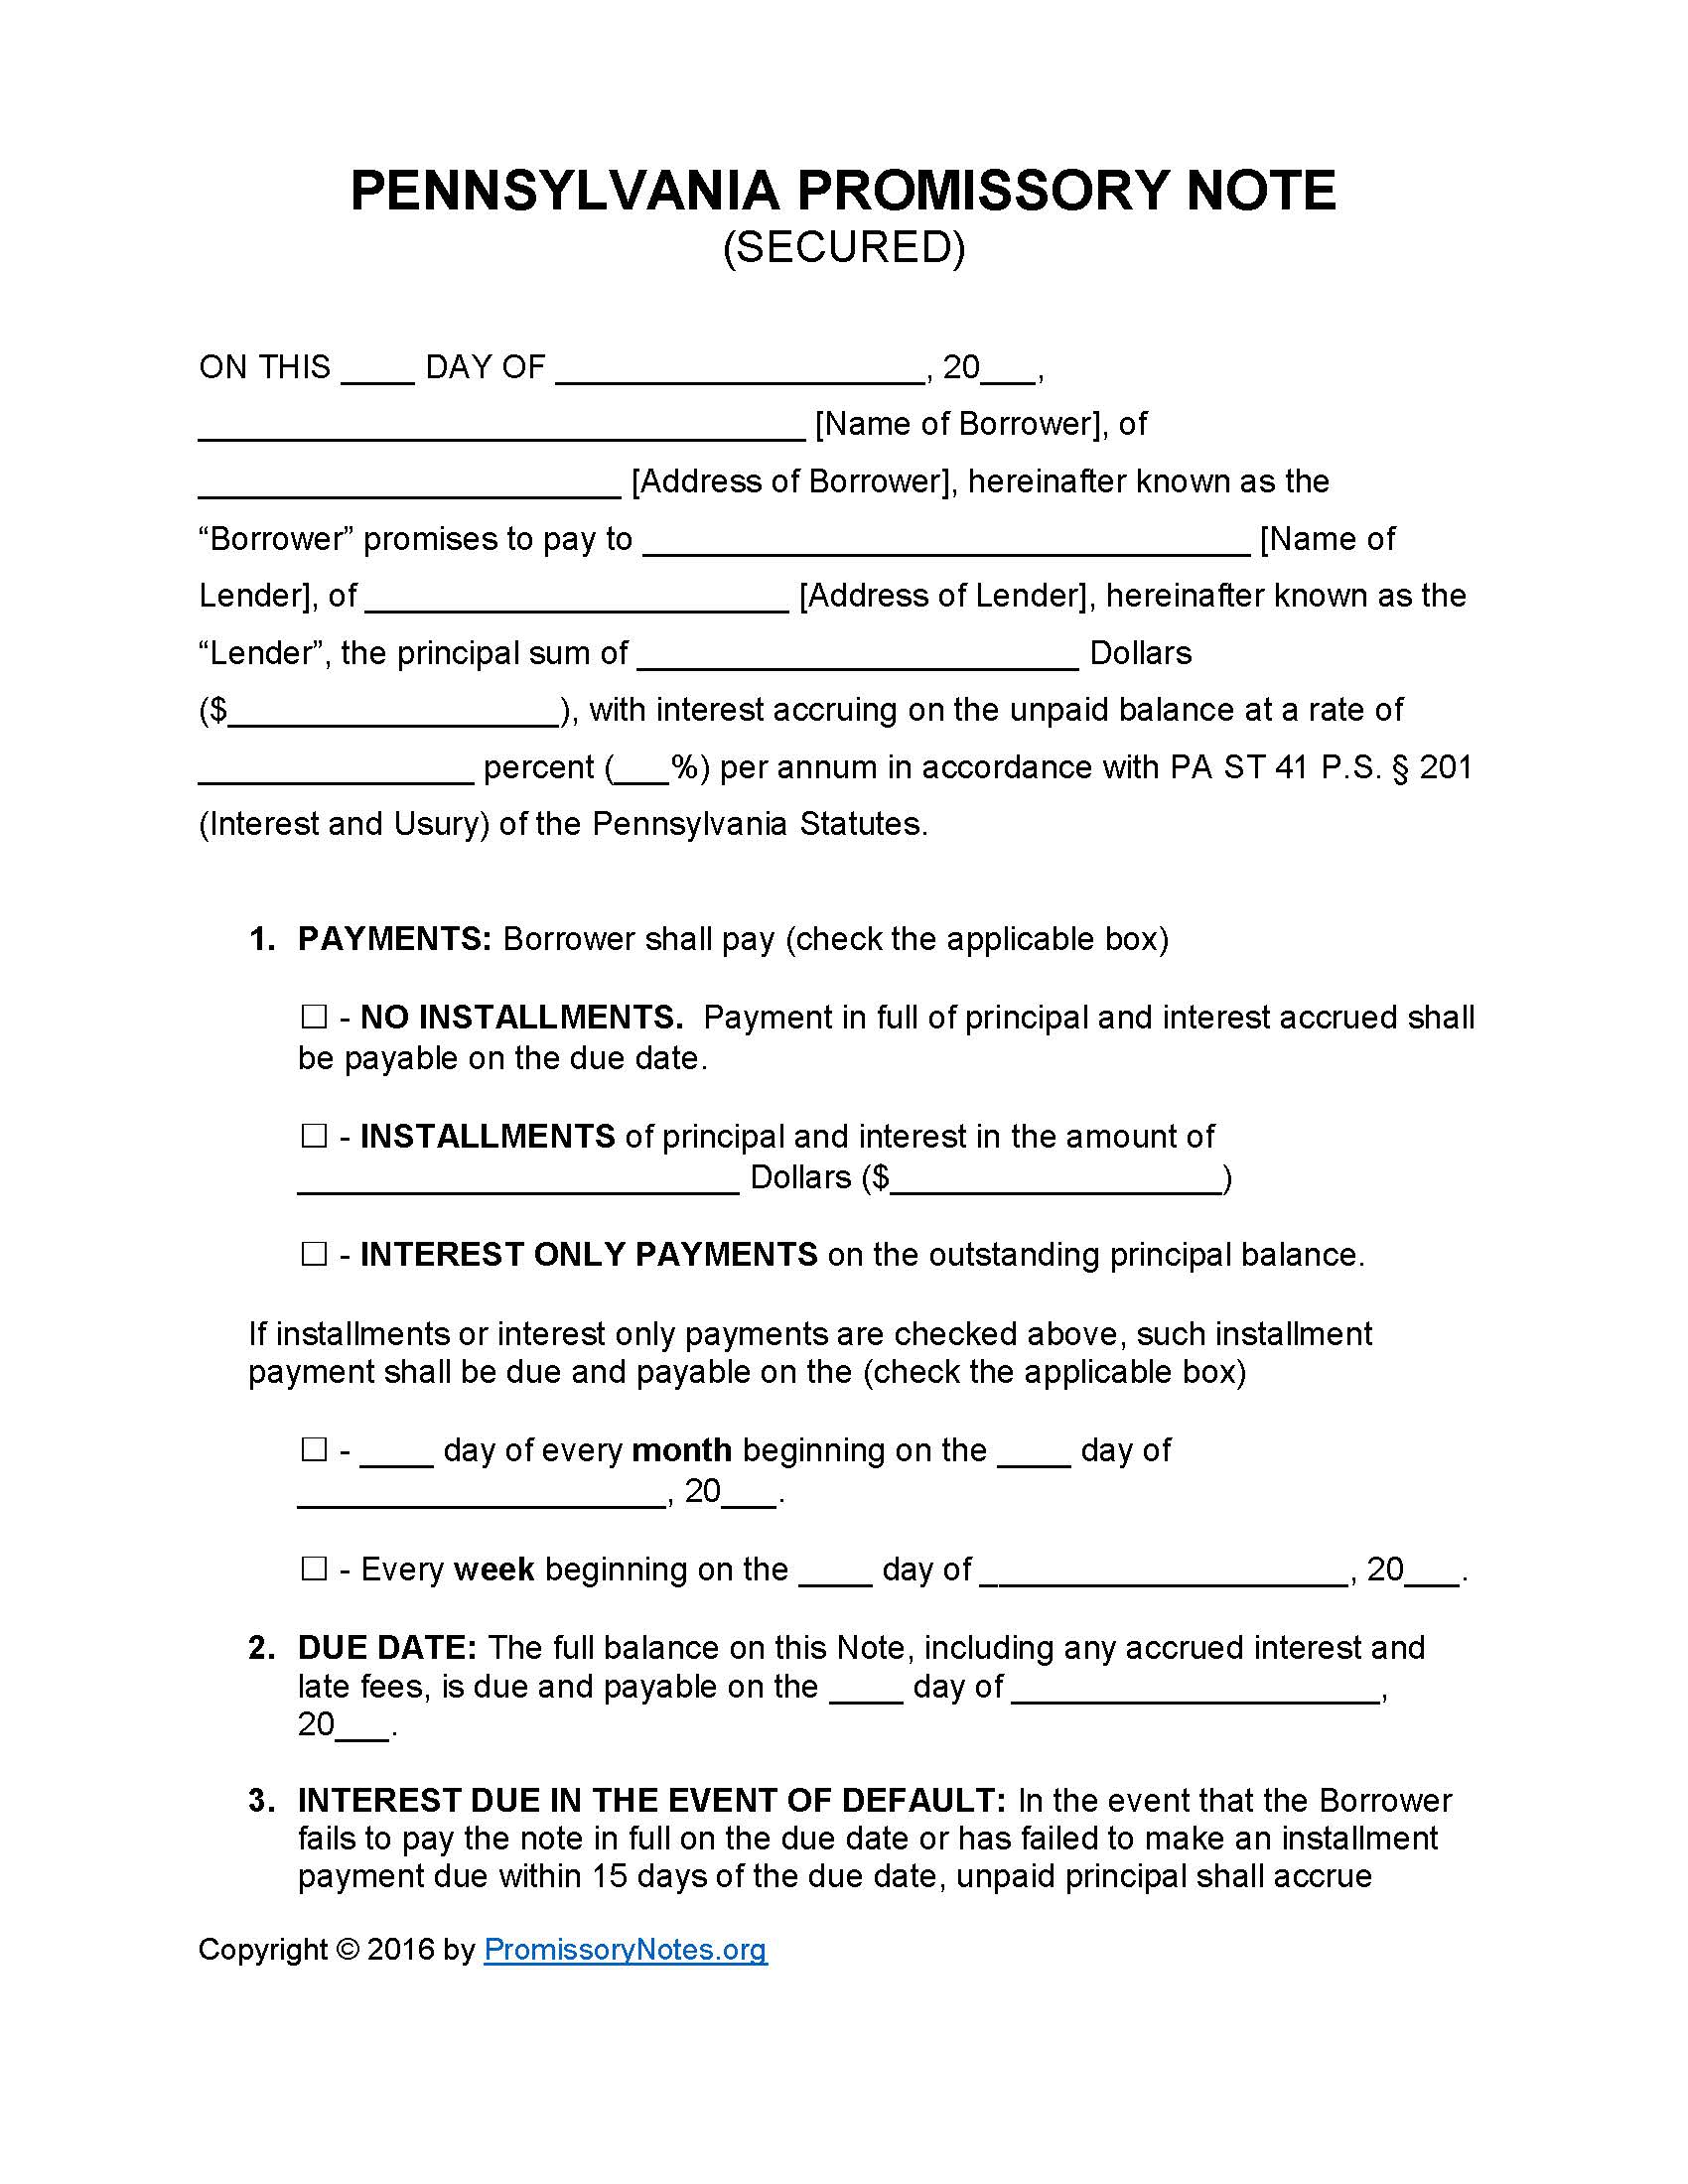 pennsylvania-secured-promissory-note-form